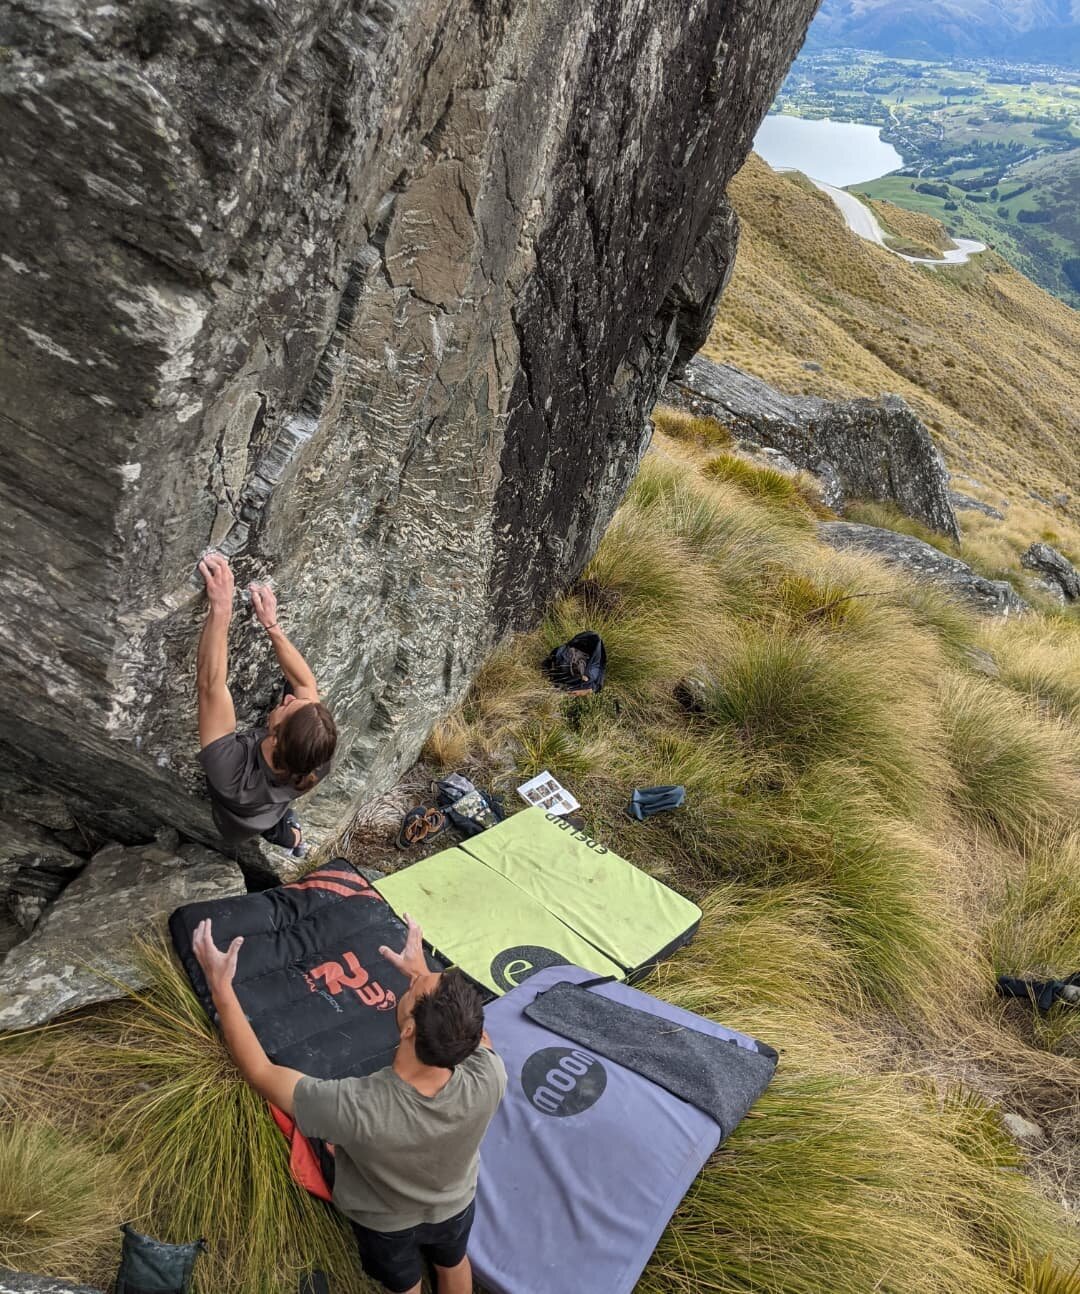 Have you been out to Rastus Burn boulders? Here are a couple of the boys out for Saturday sesh
@j_hewson
@bobbyzalac
@brian_daly88

#queenstown #climbhard #newzealandclimbing #climbhigh #outdoorlife